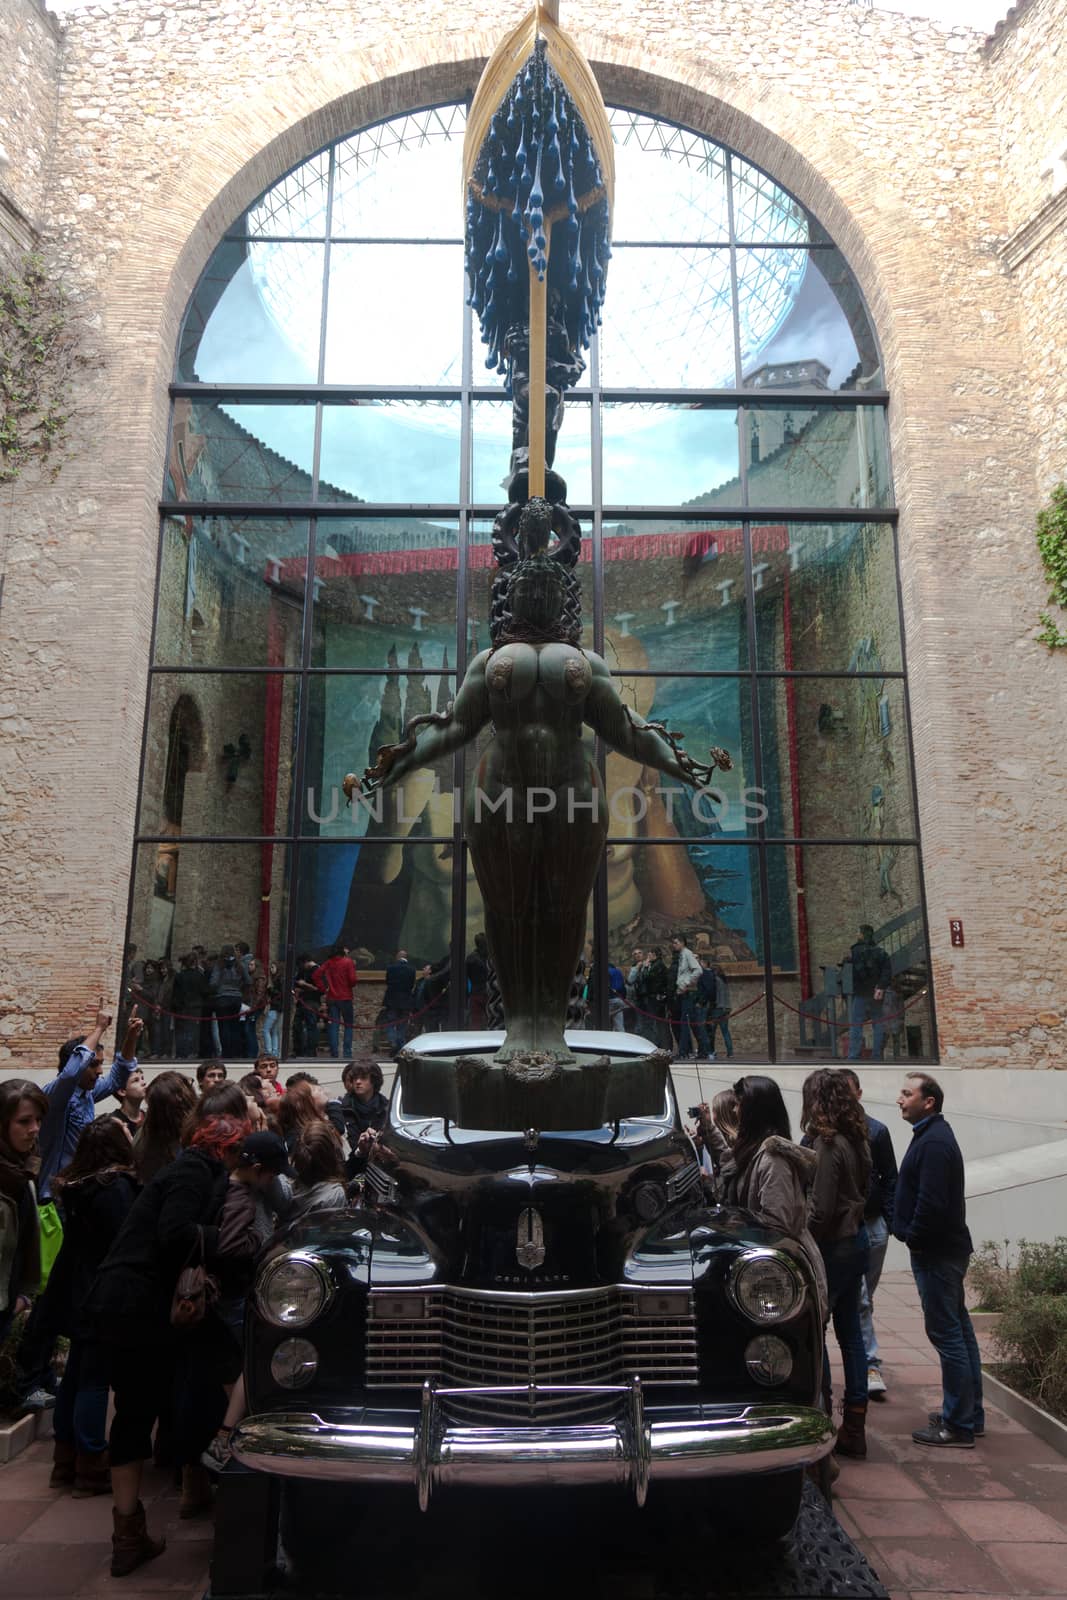 Dali Museum in Figueres, Spain by Portokalis